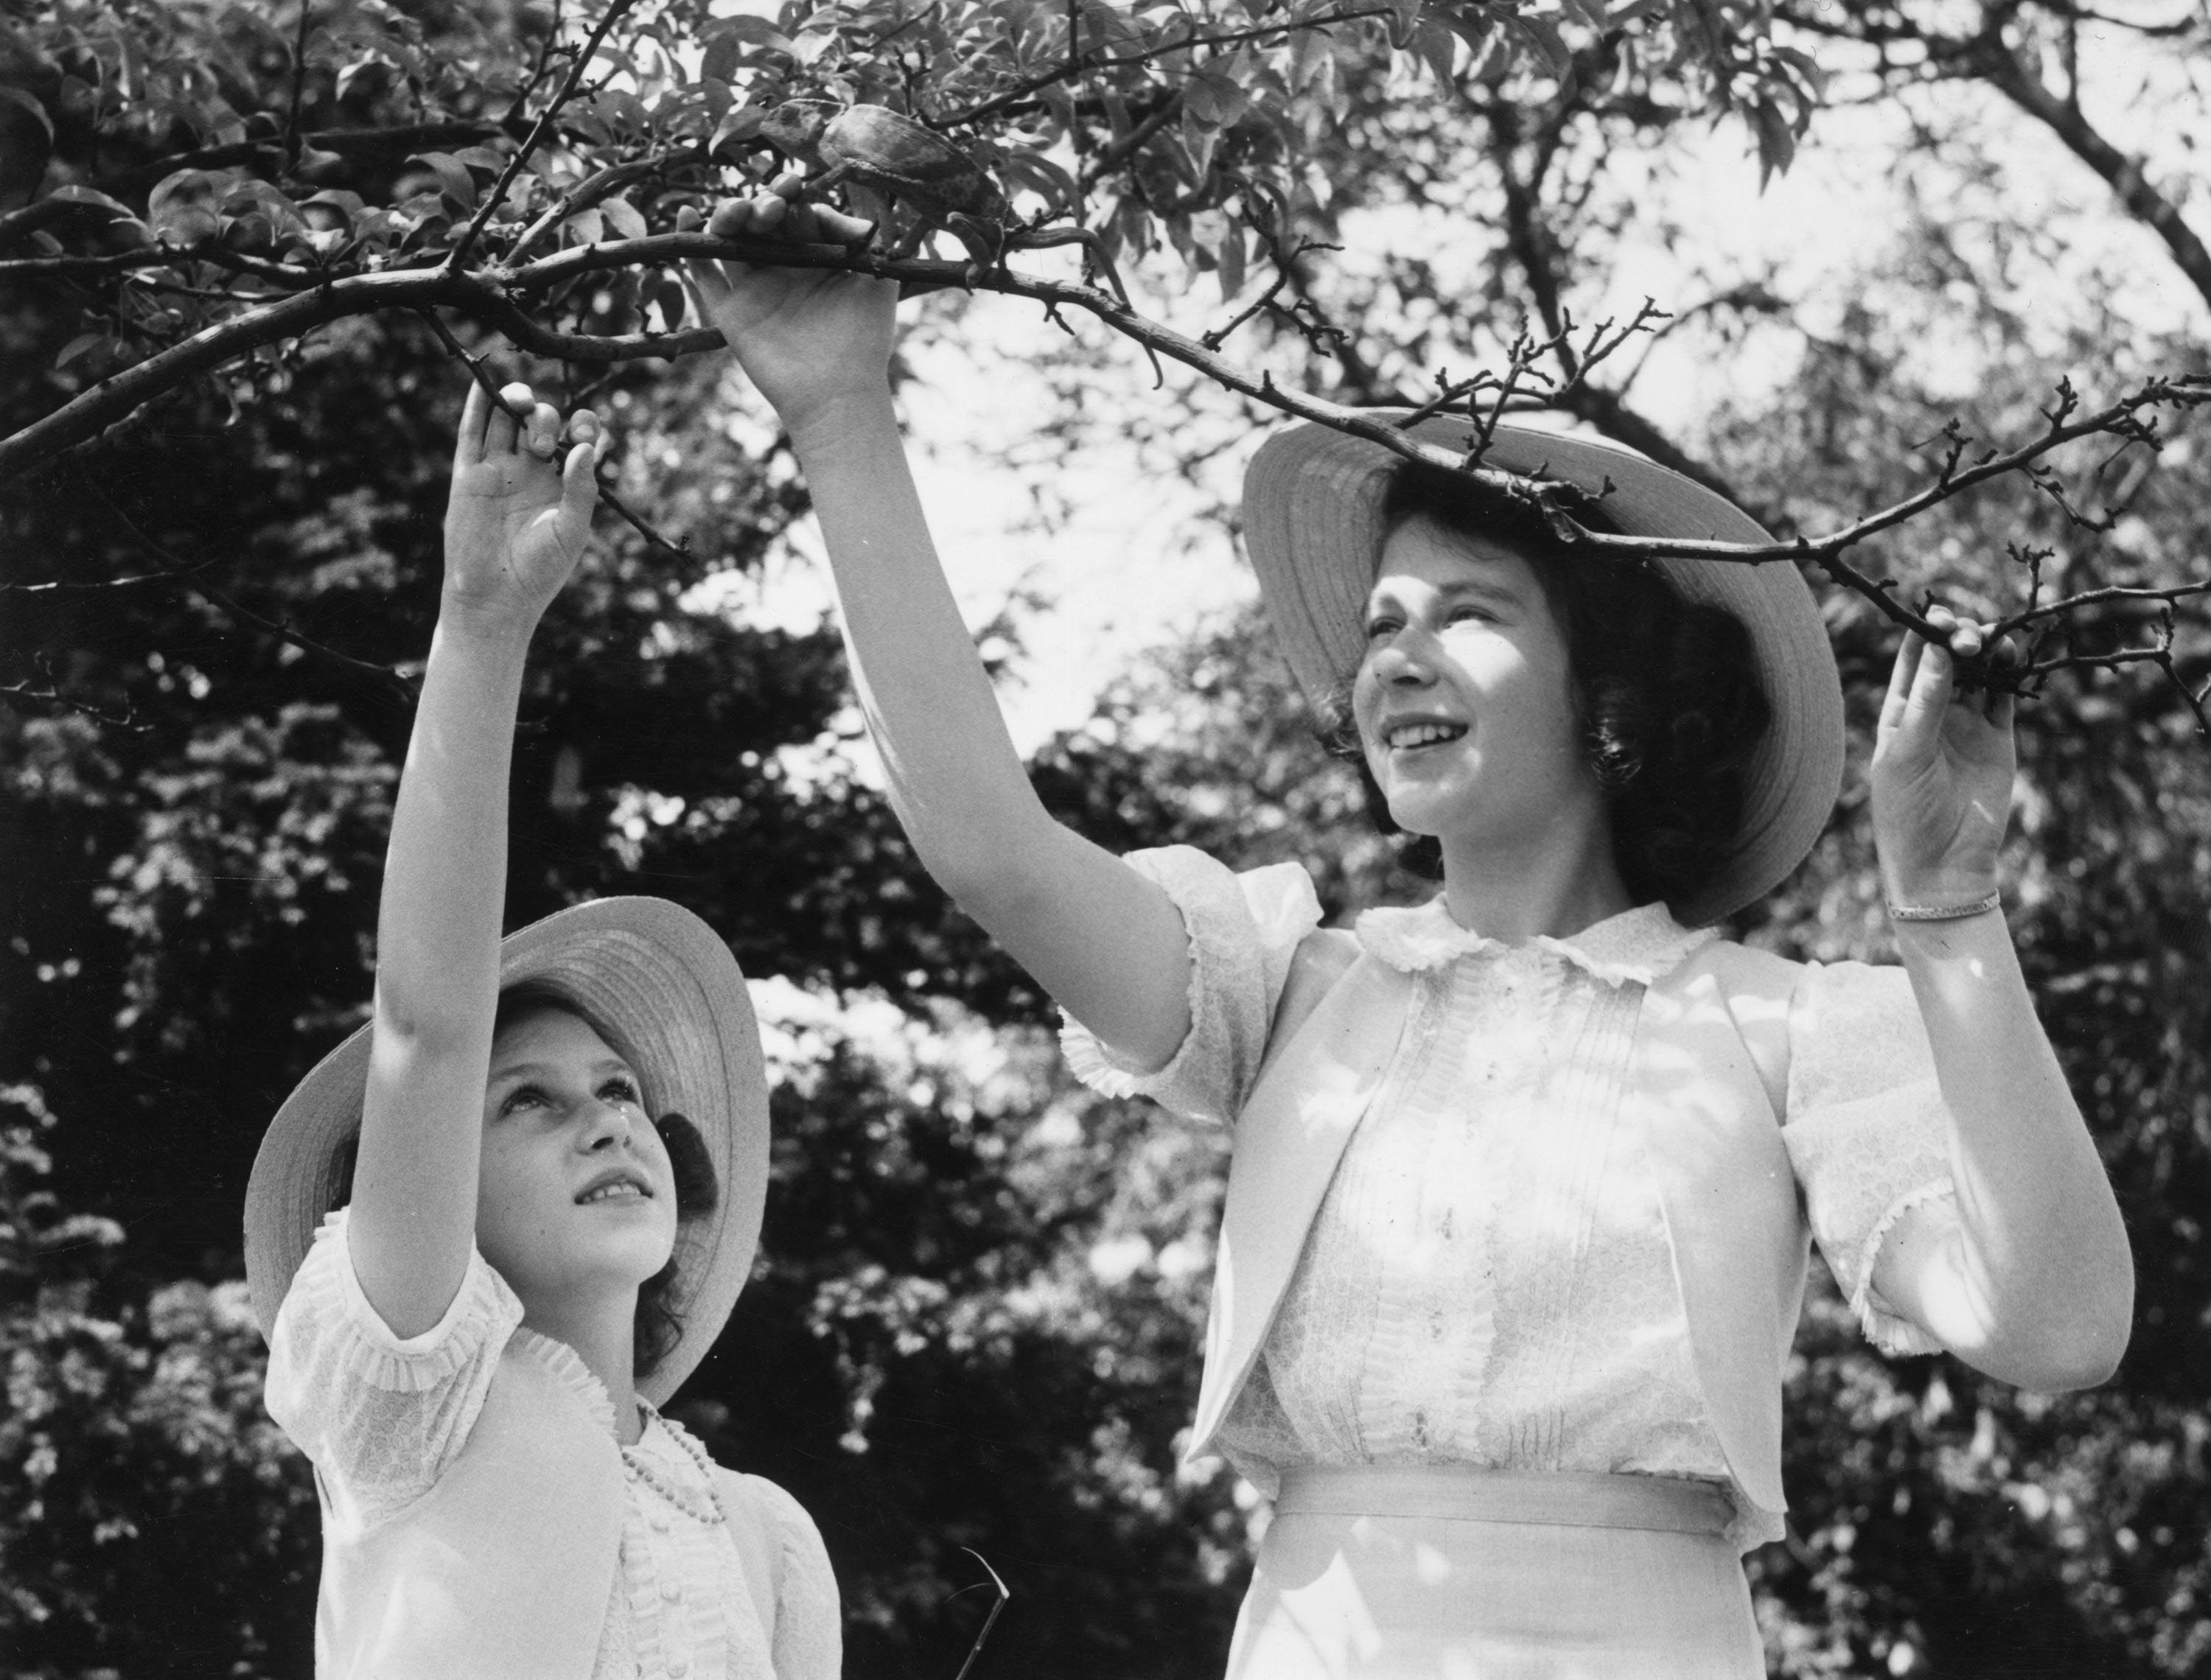 A young Princess (later Queen) Elizabeth and Princess Margaret